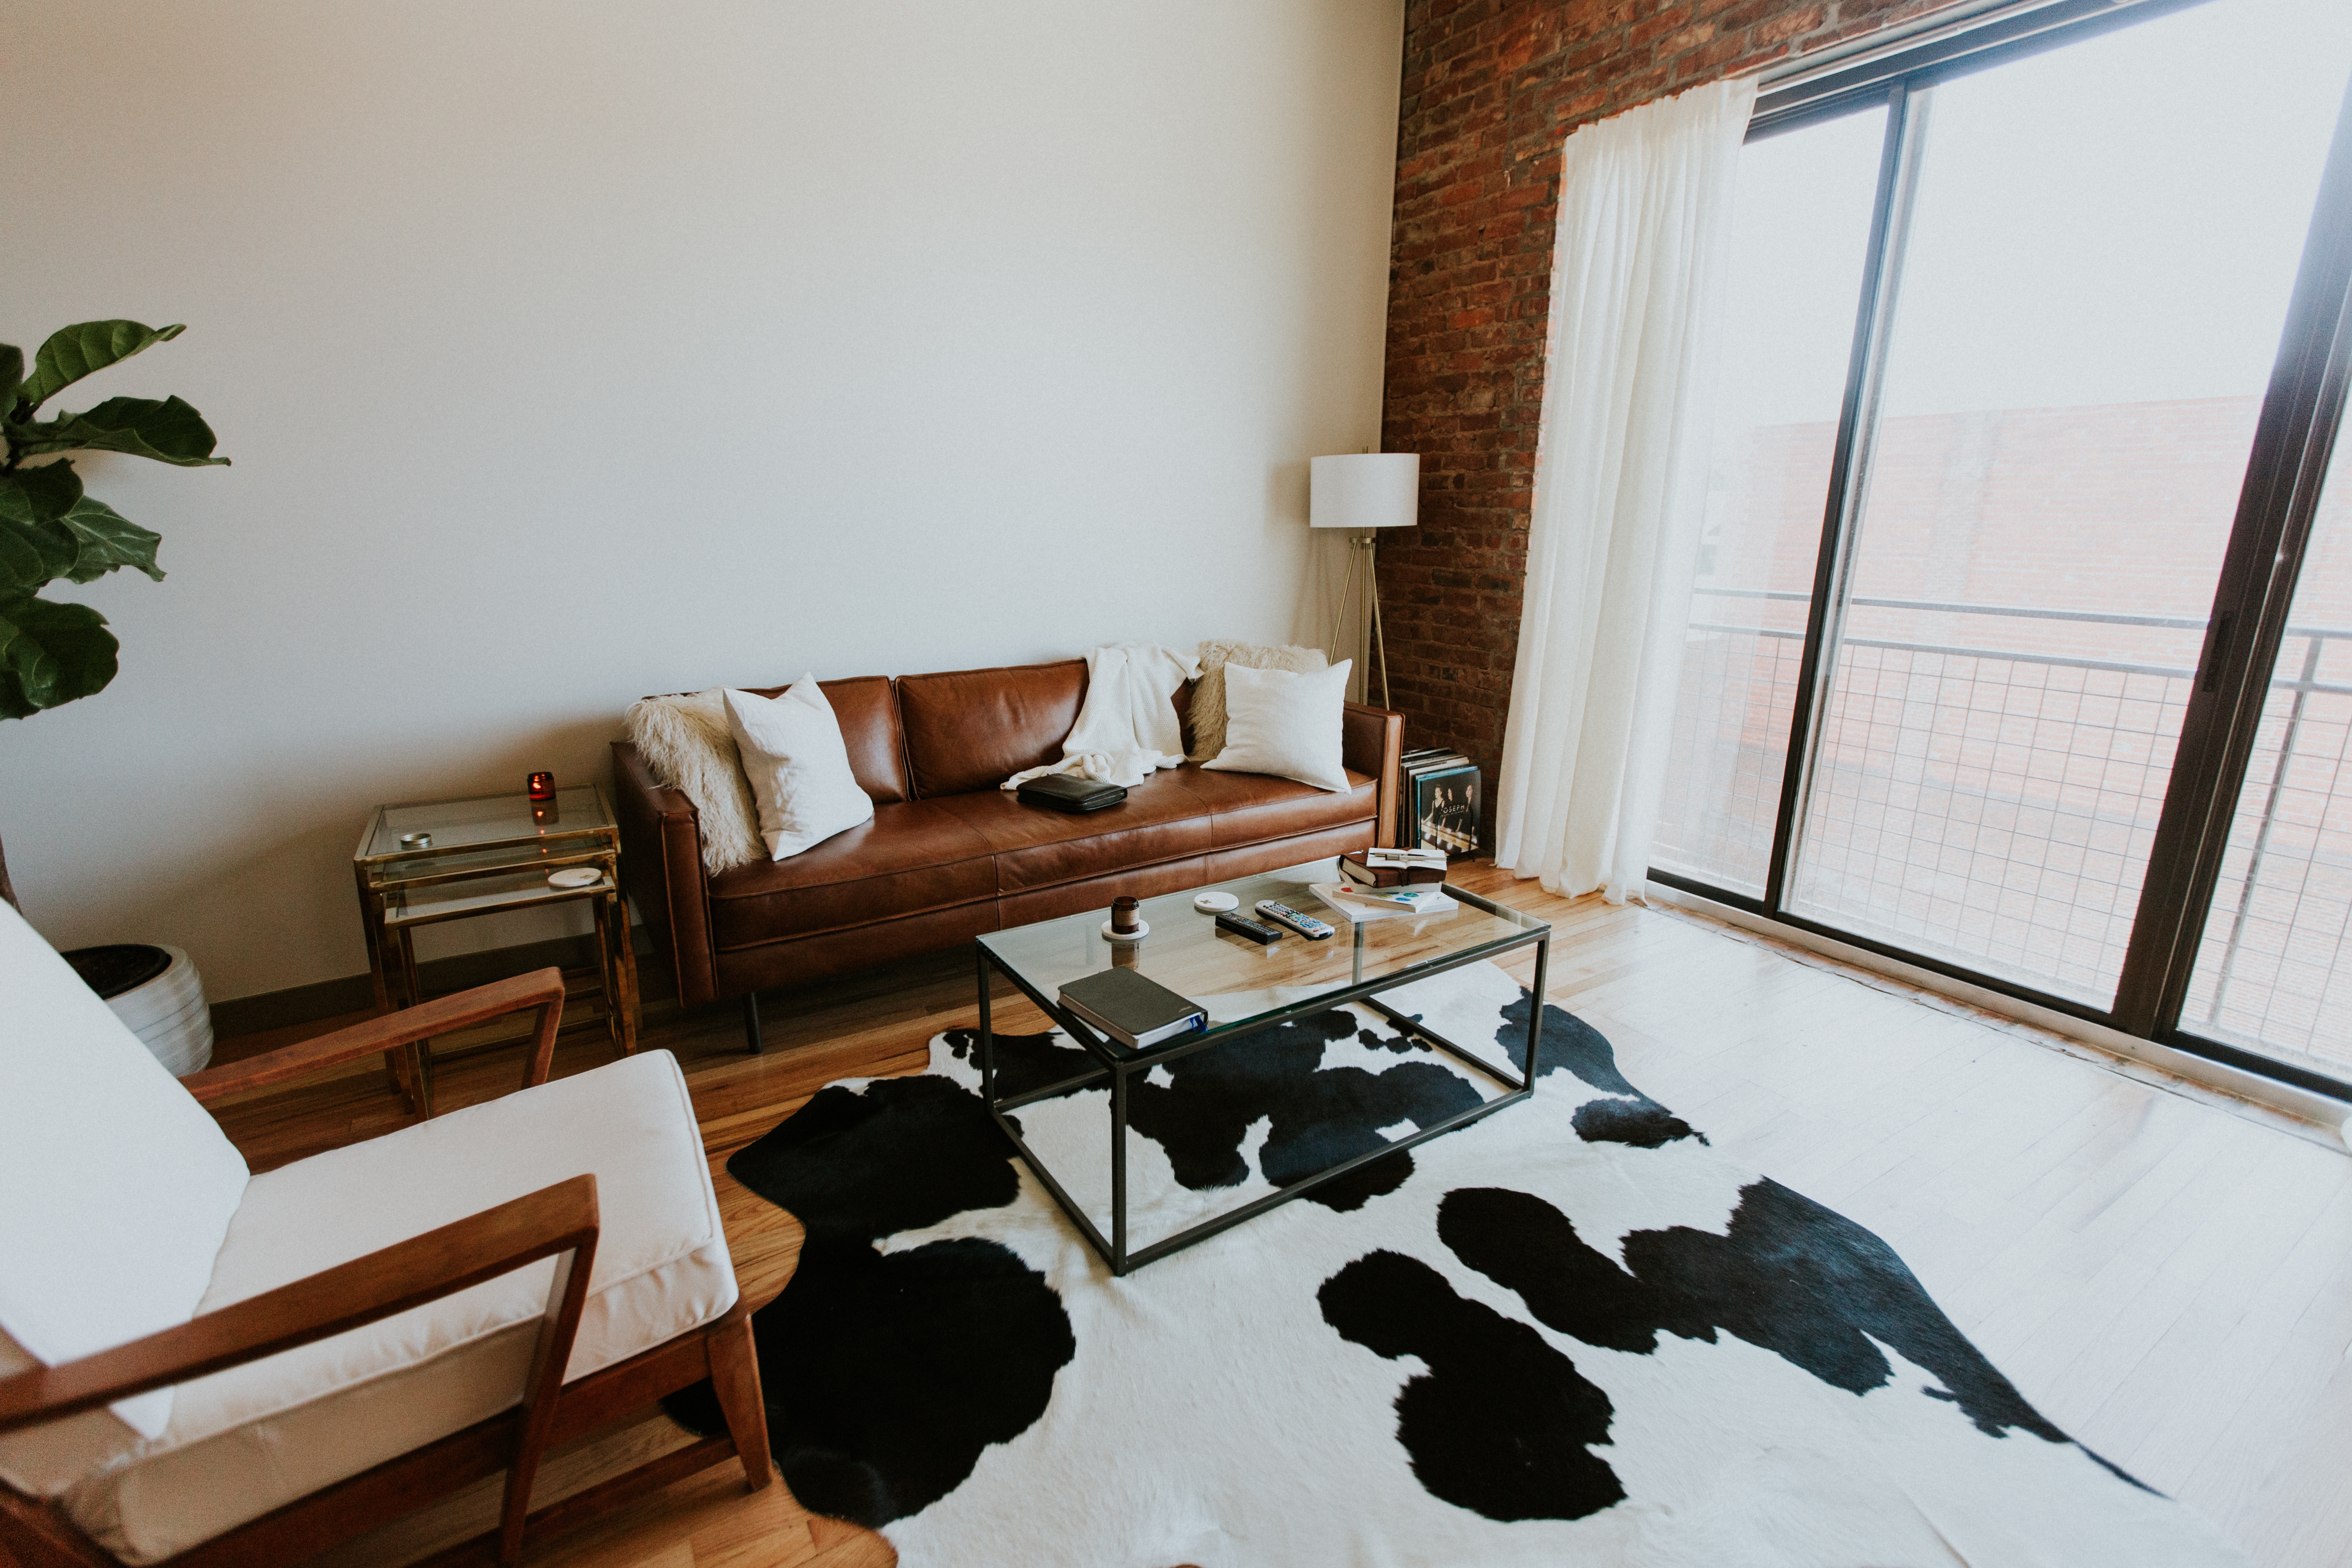 Where to Buy Cheap Furniture for Your Apartment